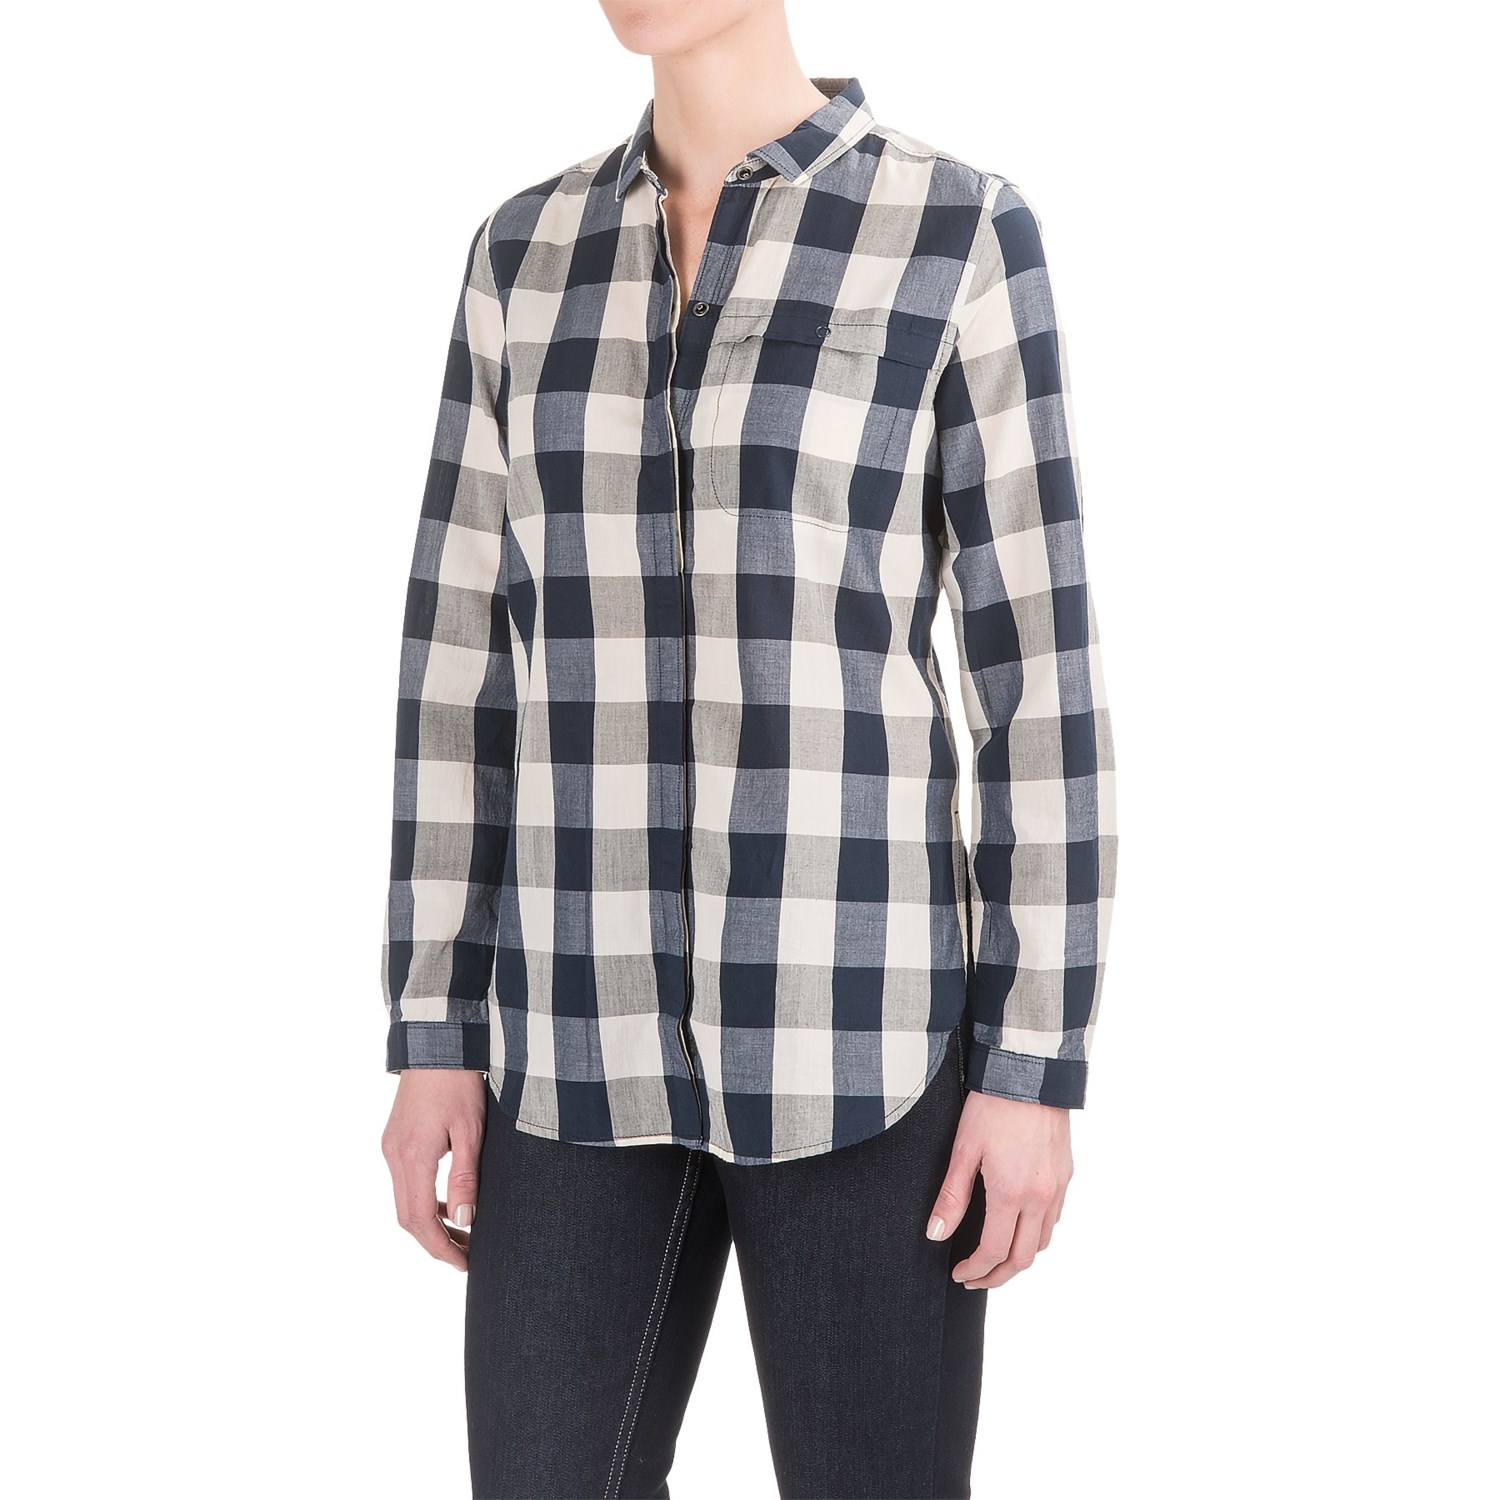 Woolrich Chambray Stag Buffalo Check Shirt (For Women)